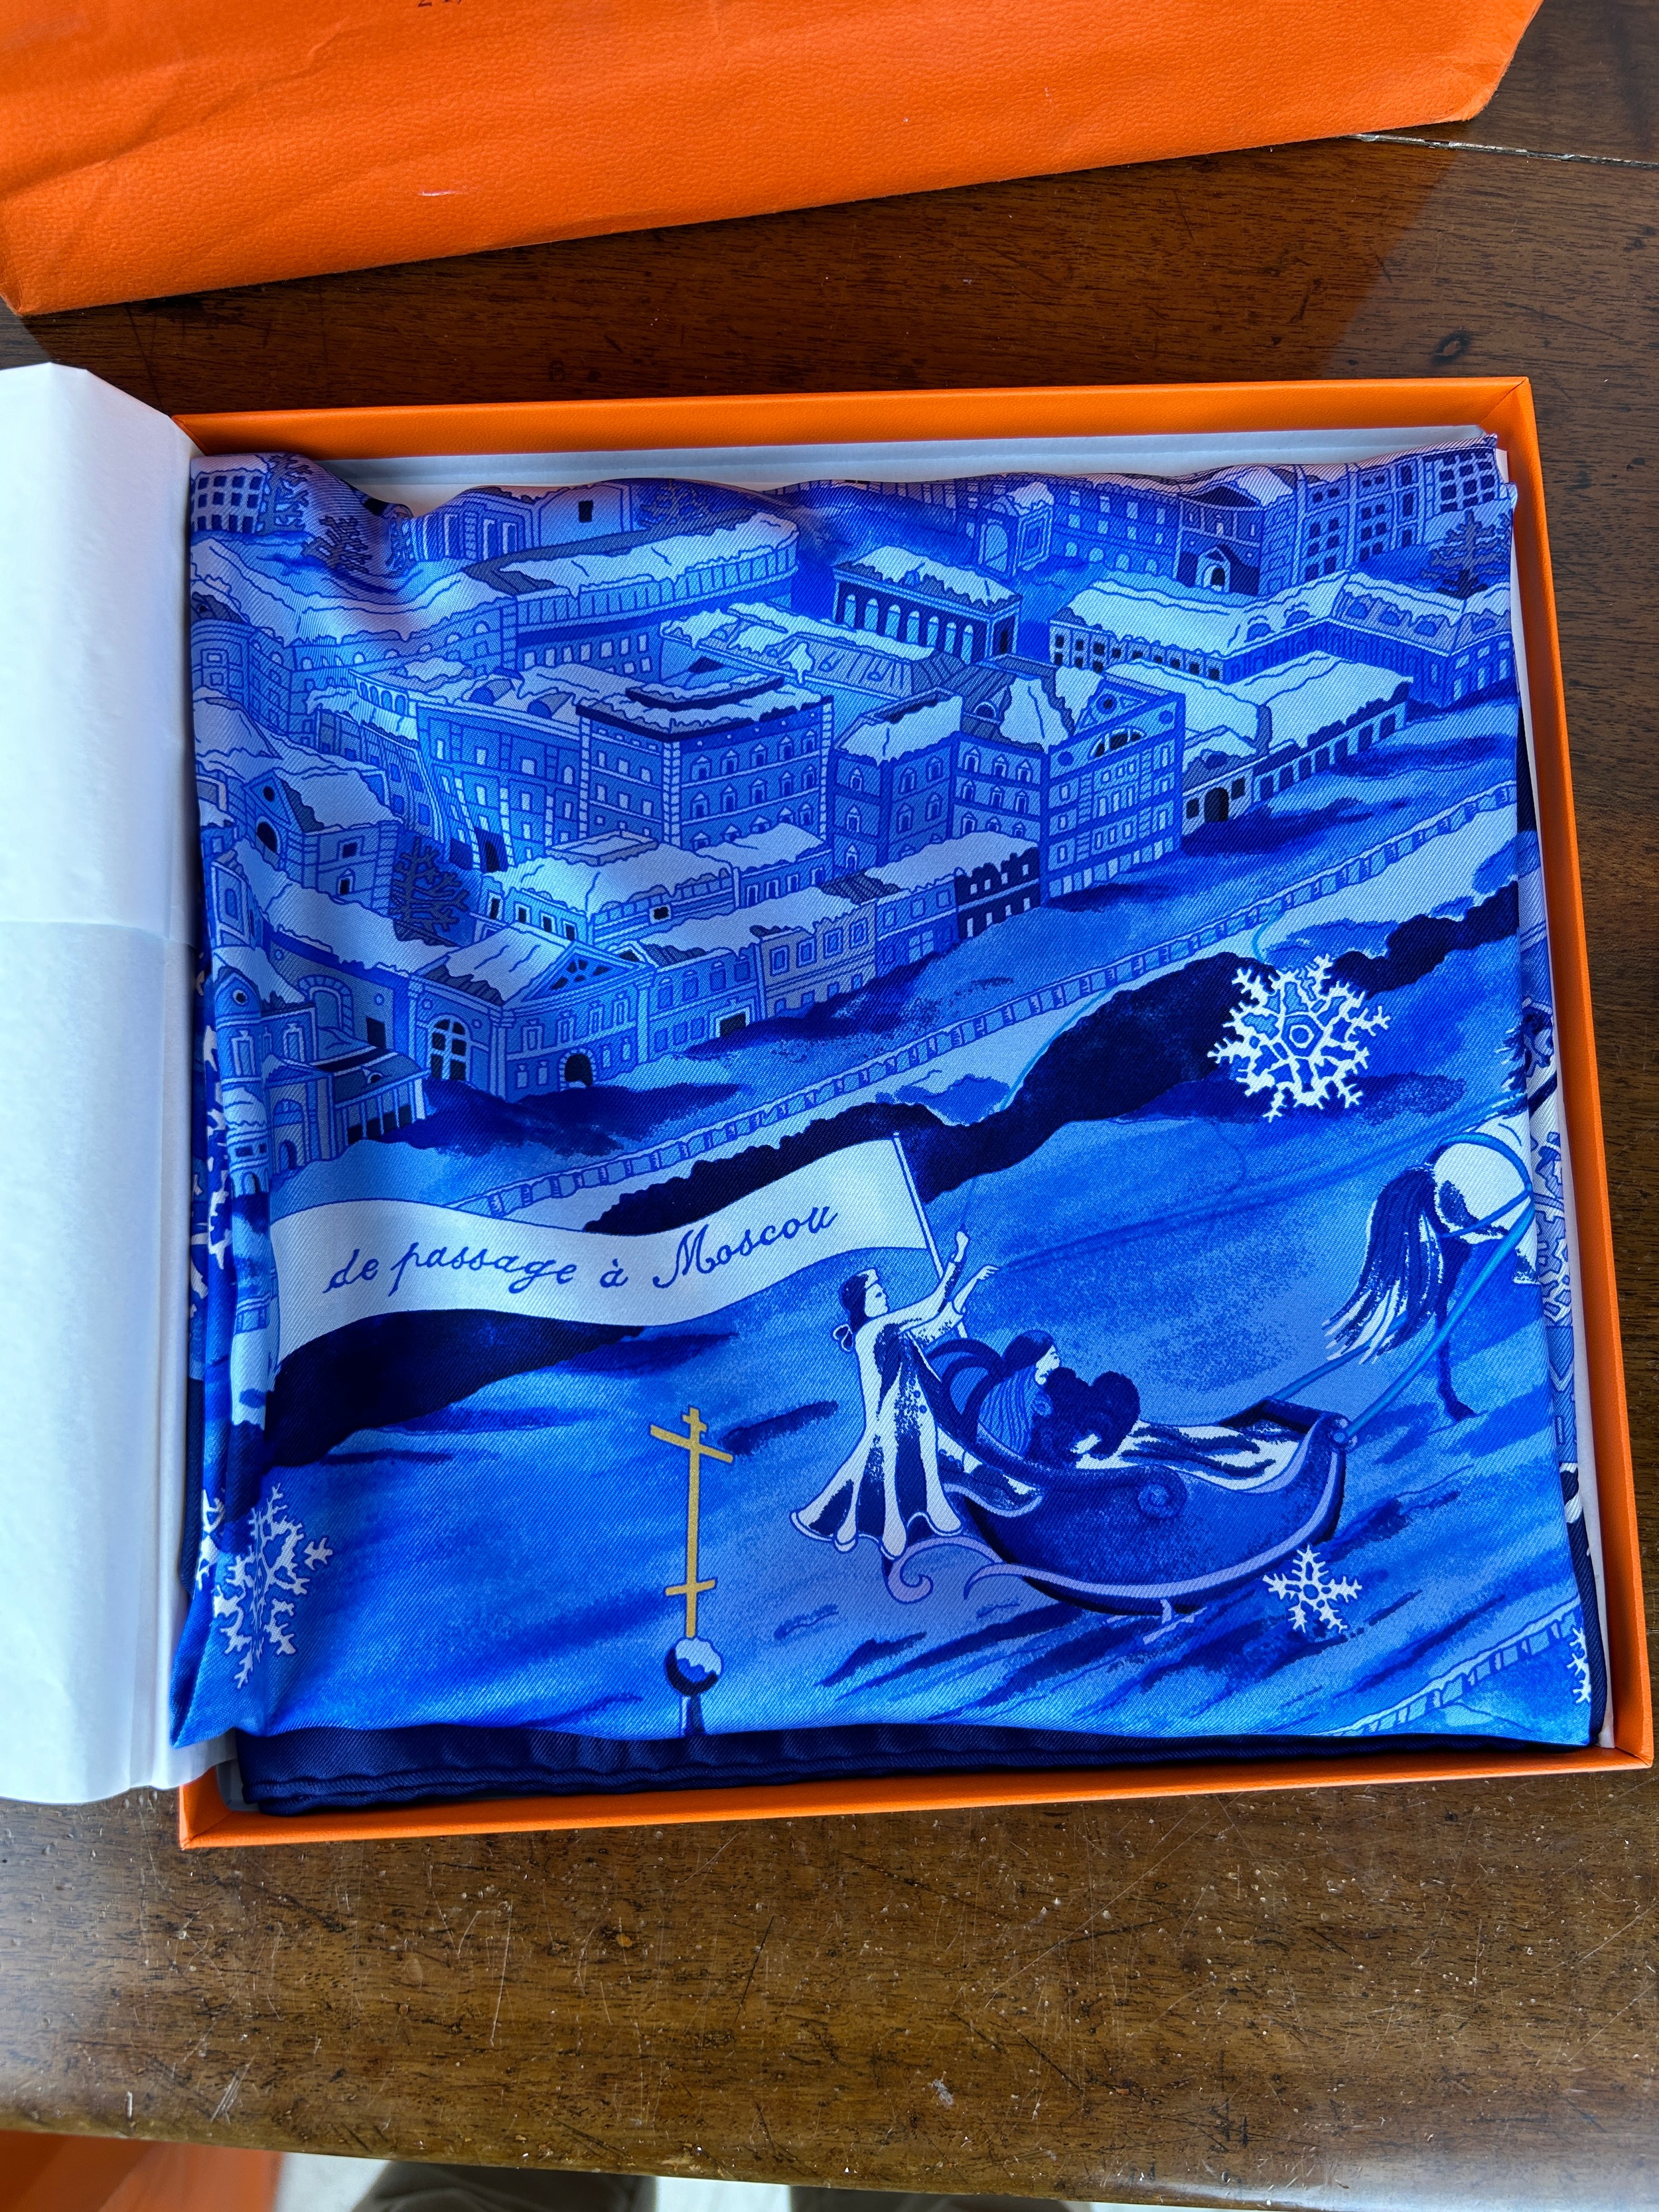 AN HERMES SILK SCARF 'DE PASSAGE A MOSCOU' IN ORIGINAL BOX AND BAG, - Image 2 of 4